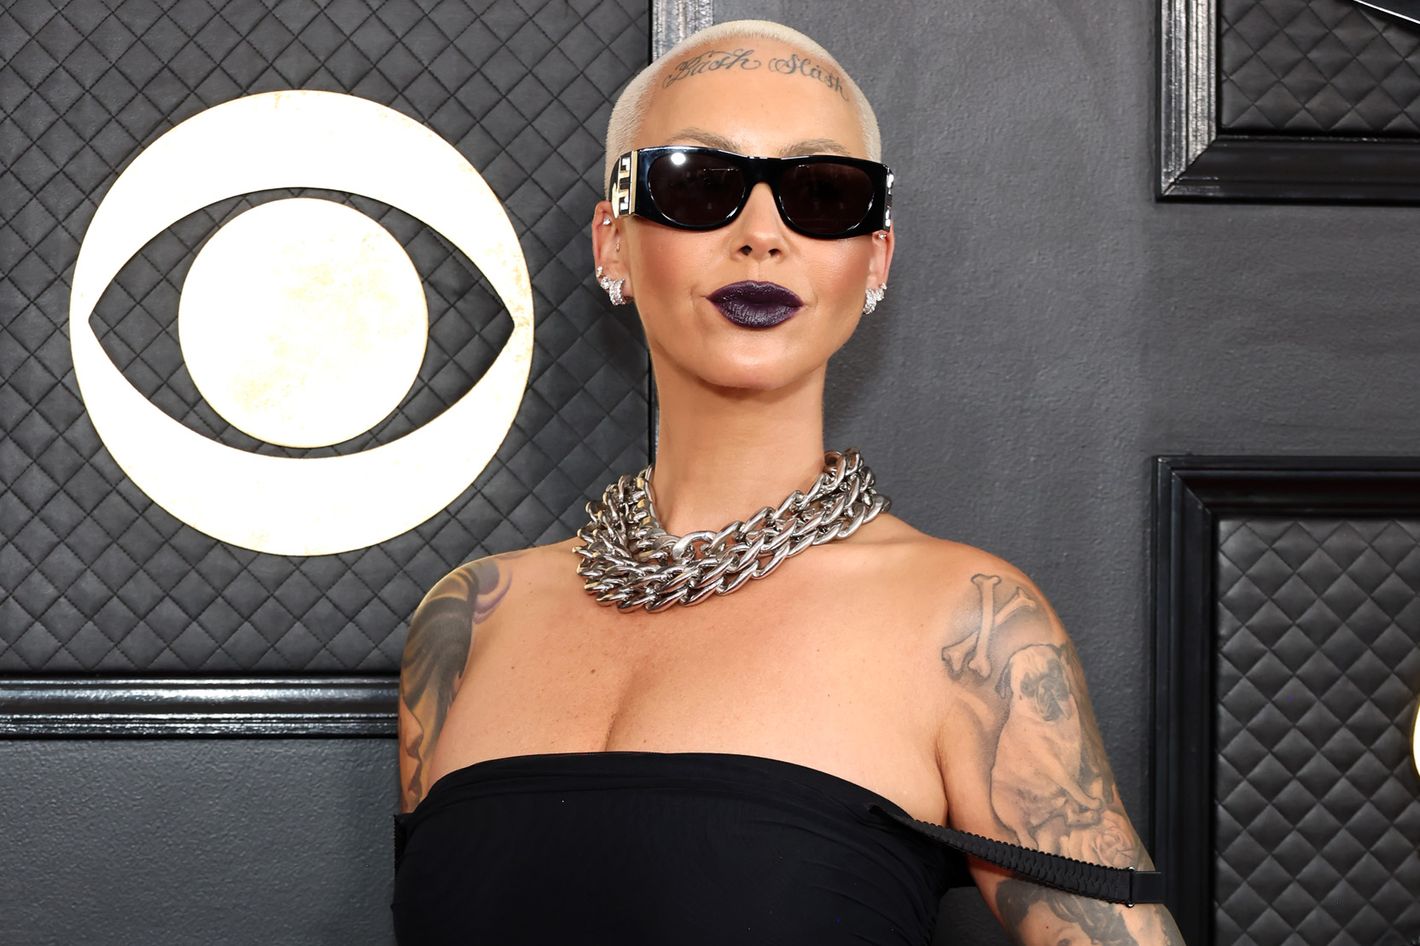 Amber Rose Wants You to Know She’s Voting For Donald Trump